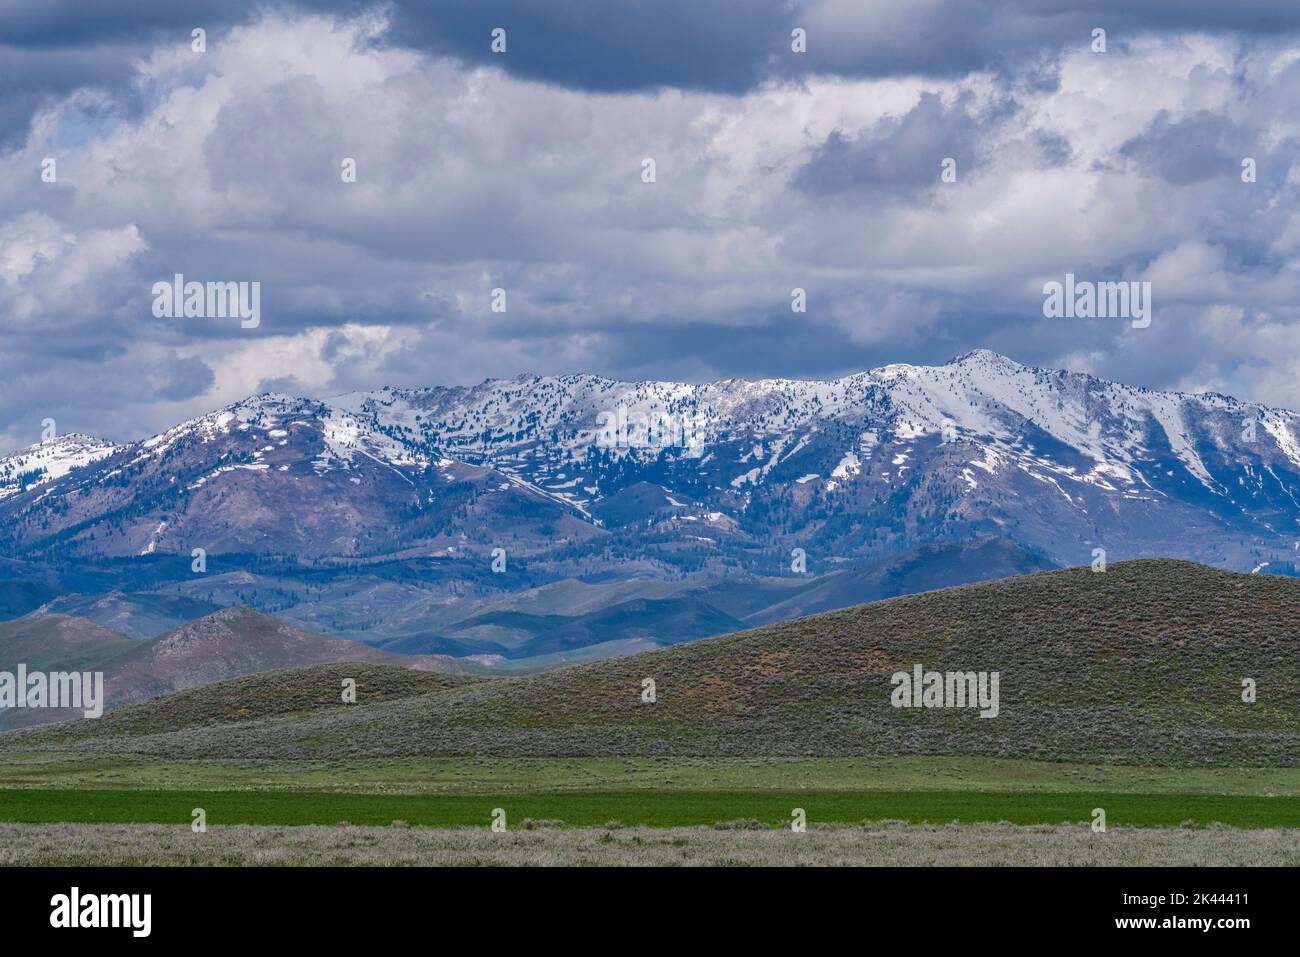 Usa, Idaho, Fairfield, Dramatic clouds over snowcapped Soldier Mountain Stock Photo